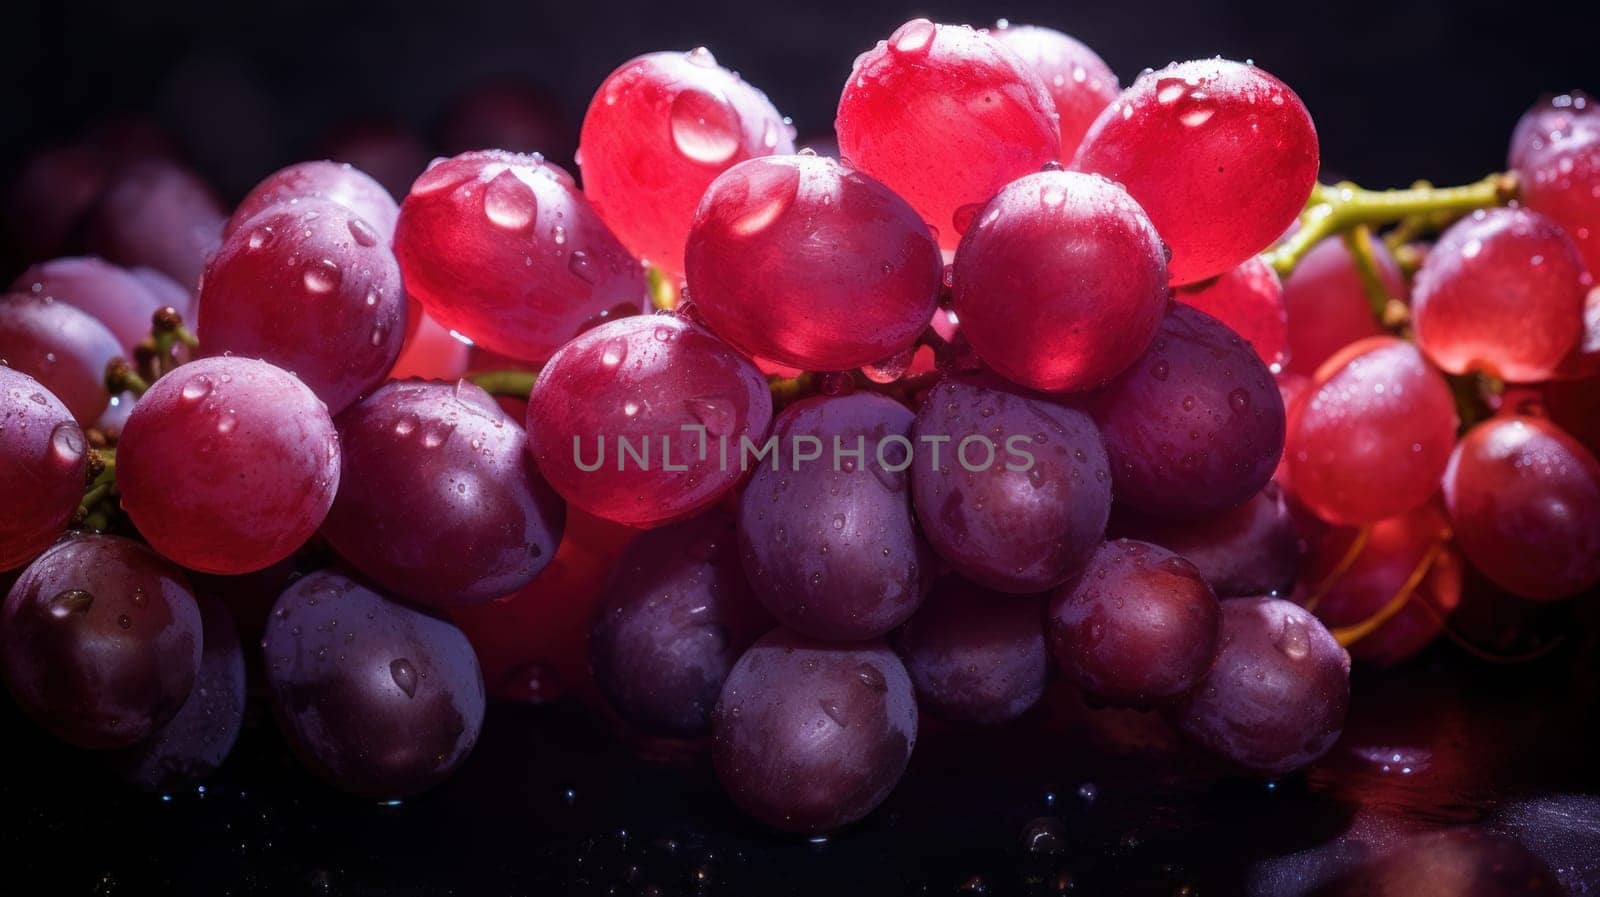 Red, pink grapes with water drops, close-up background. Wine making, vineyards, tourism business, small and private business, chain restaurant, flavorful food and drinks